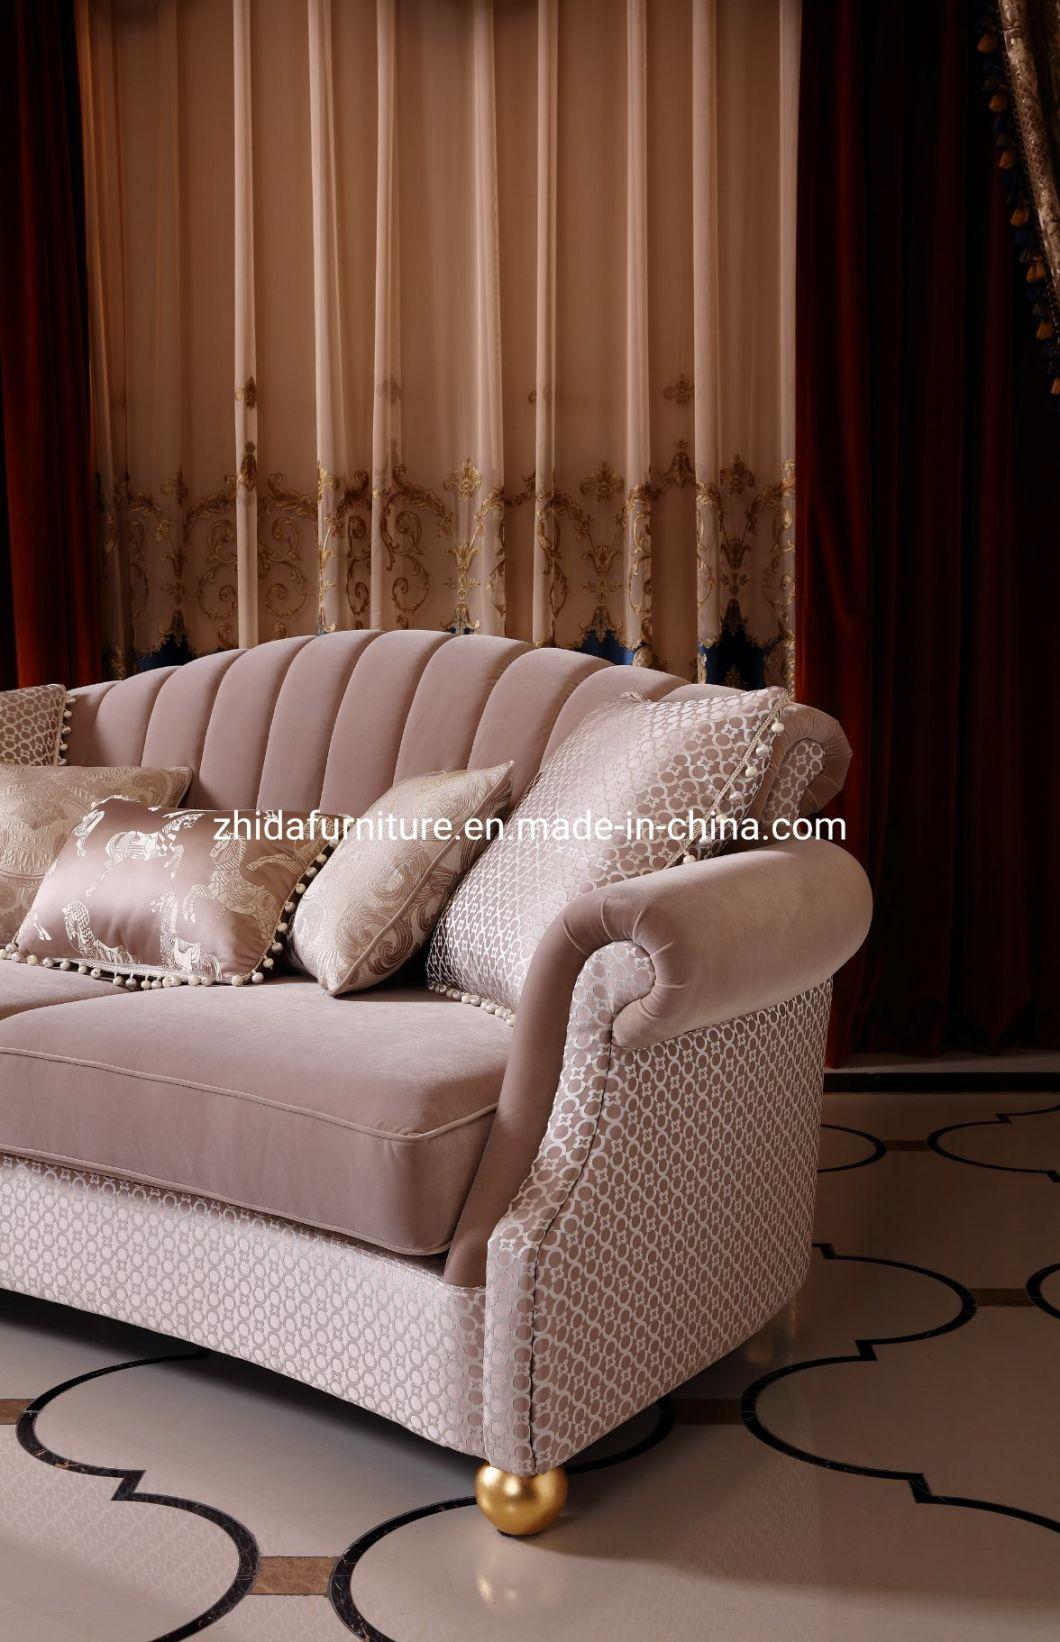 Zhida Antique Style Home Furniture American Design Fabric Velvet Living Room Furniture 1 2 3 Seater Luxury Sofa Couch Set